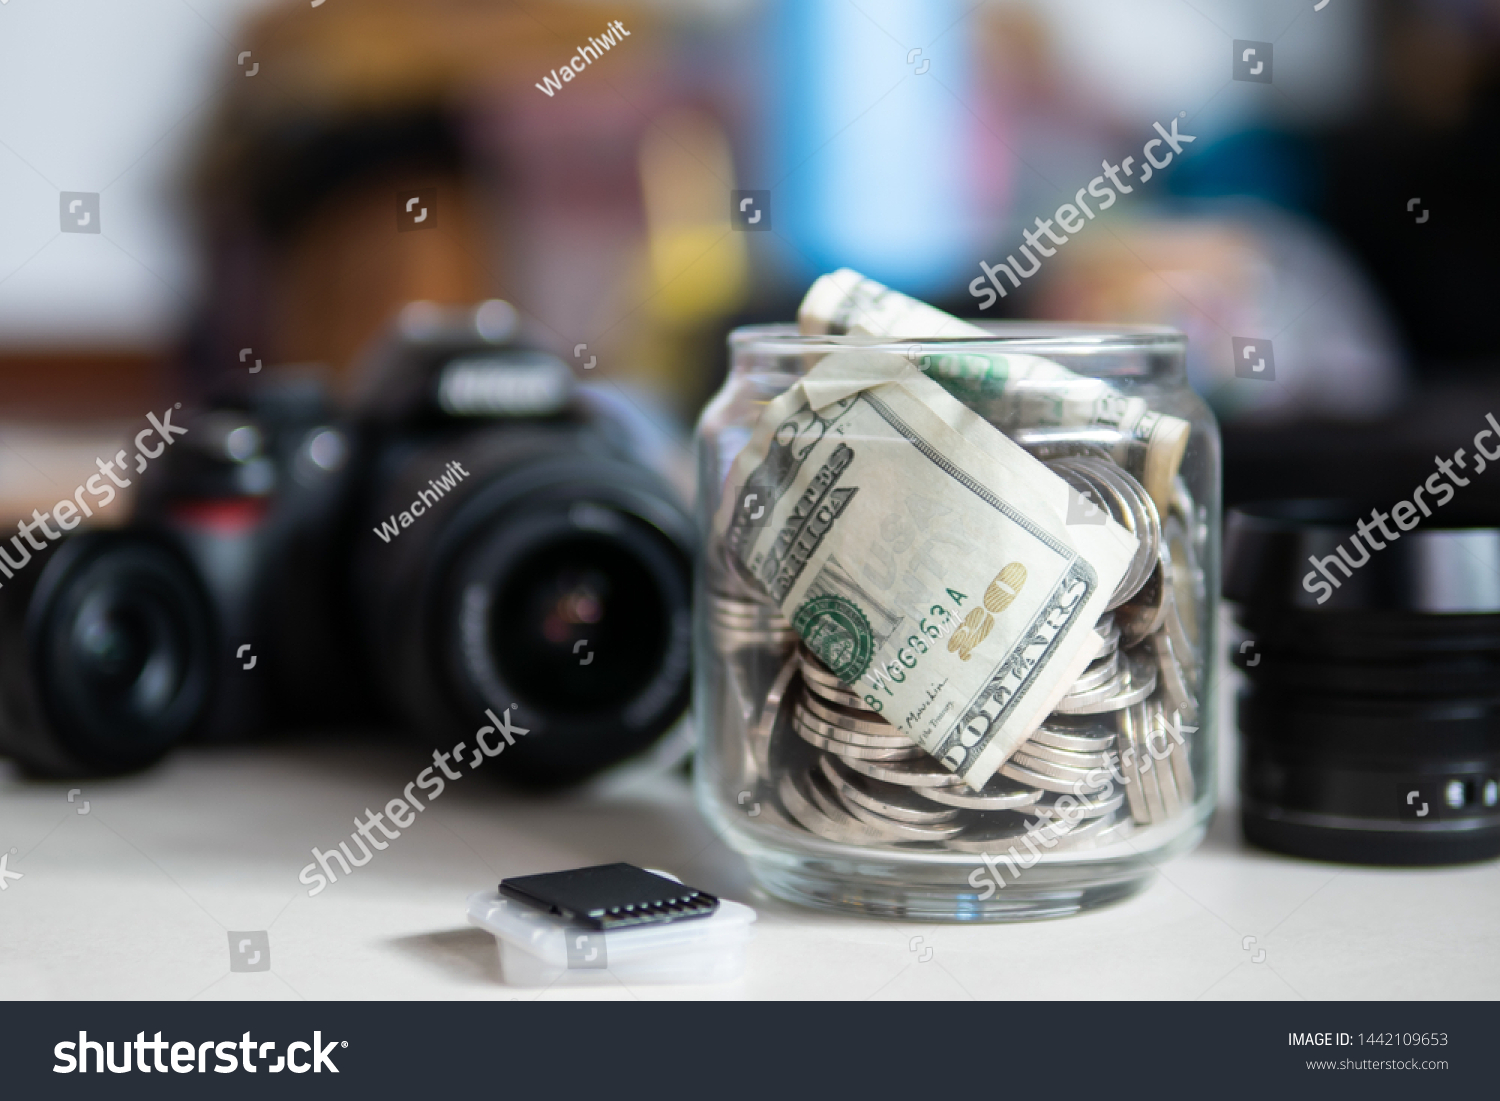 Make Money with Photography